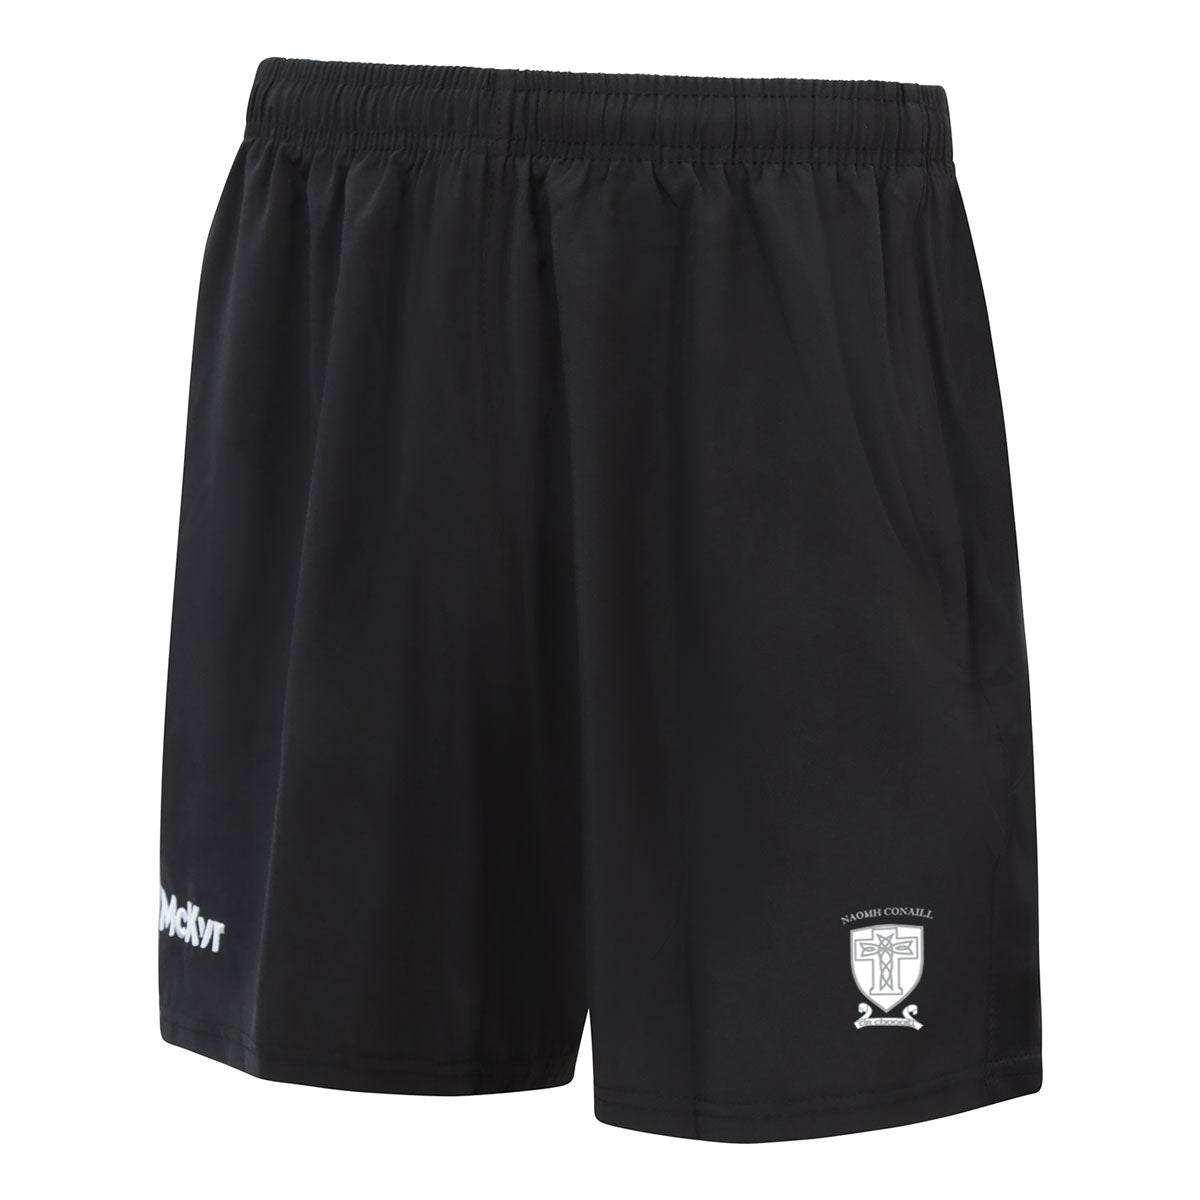 Mc Keever Naomh Conaill Donegal Core 22 Leisure Shorts - Youth - Black